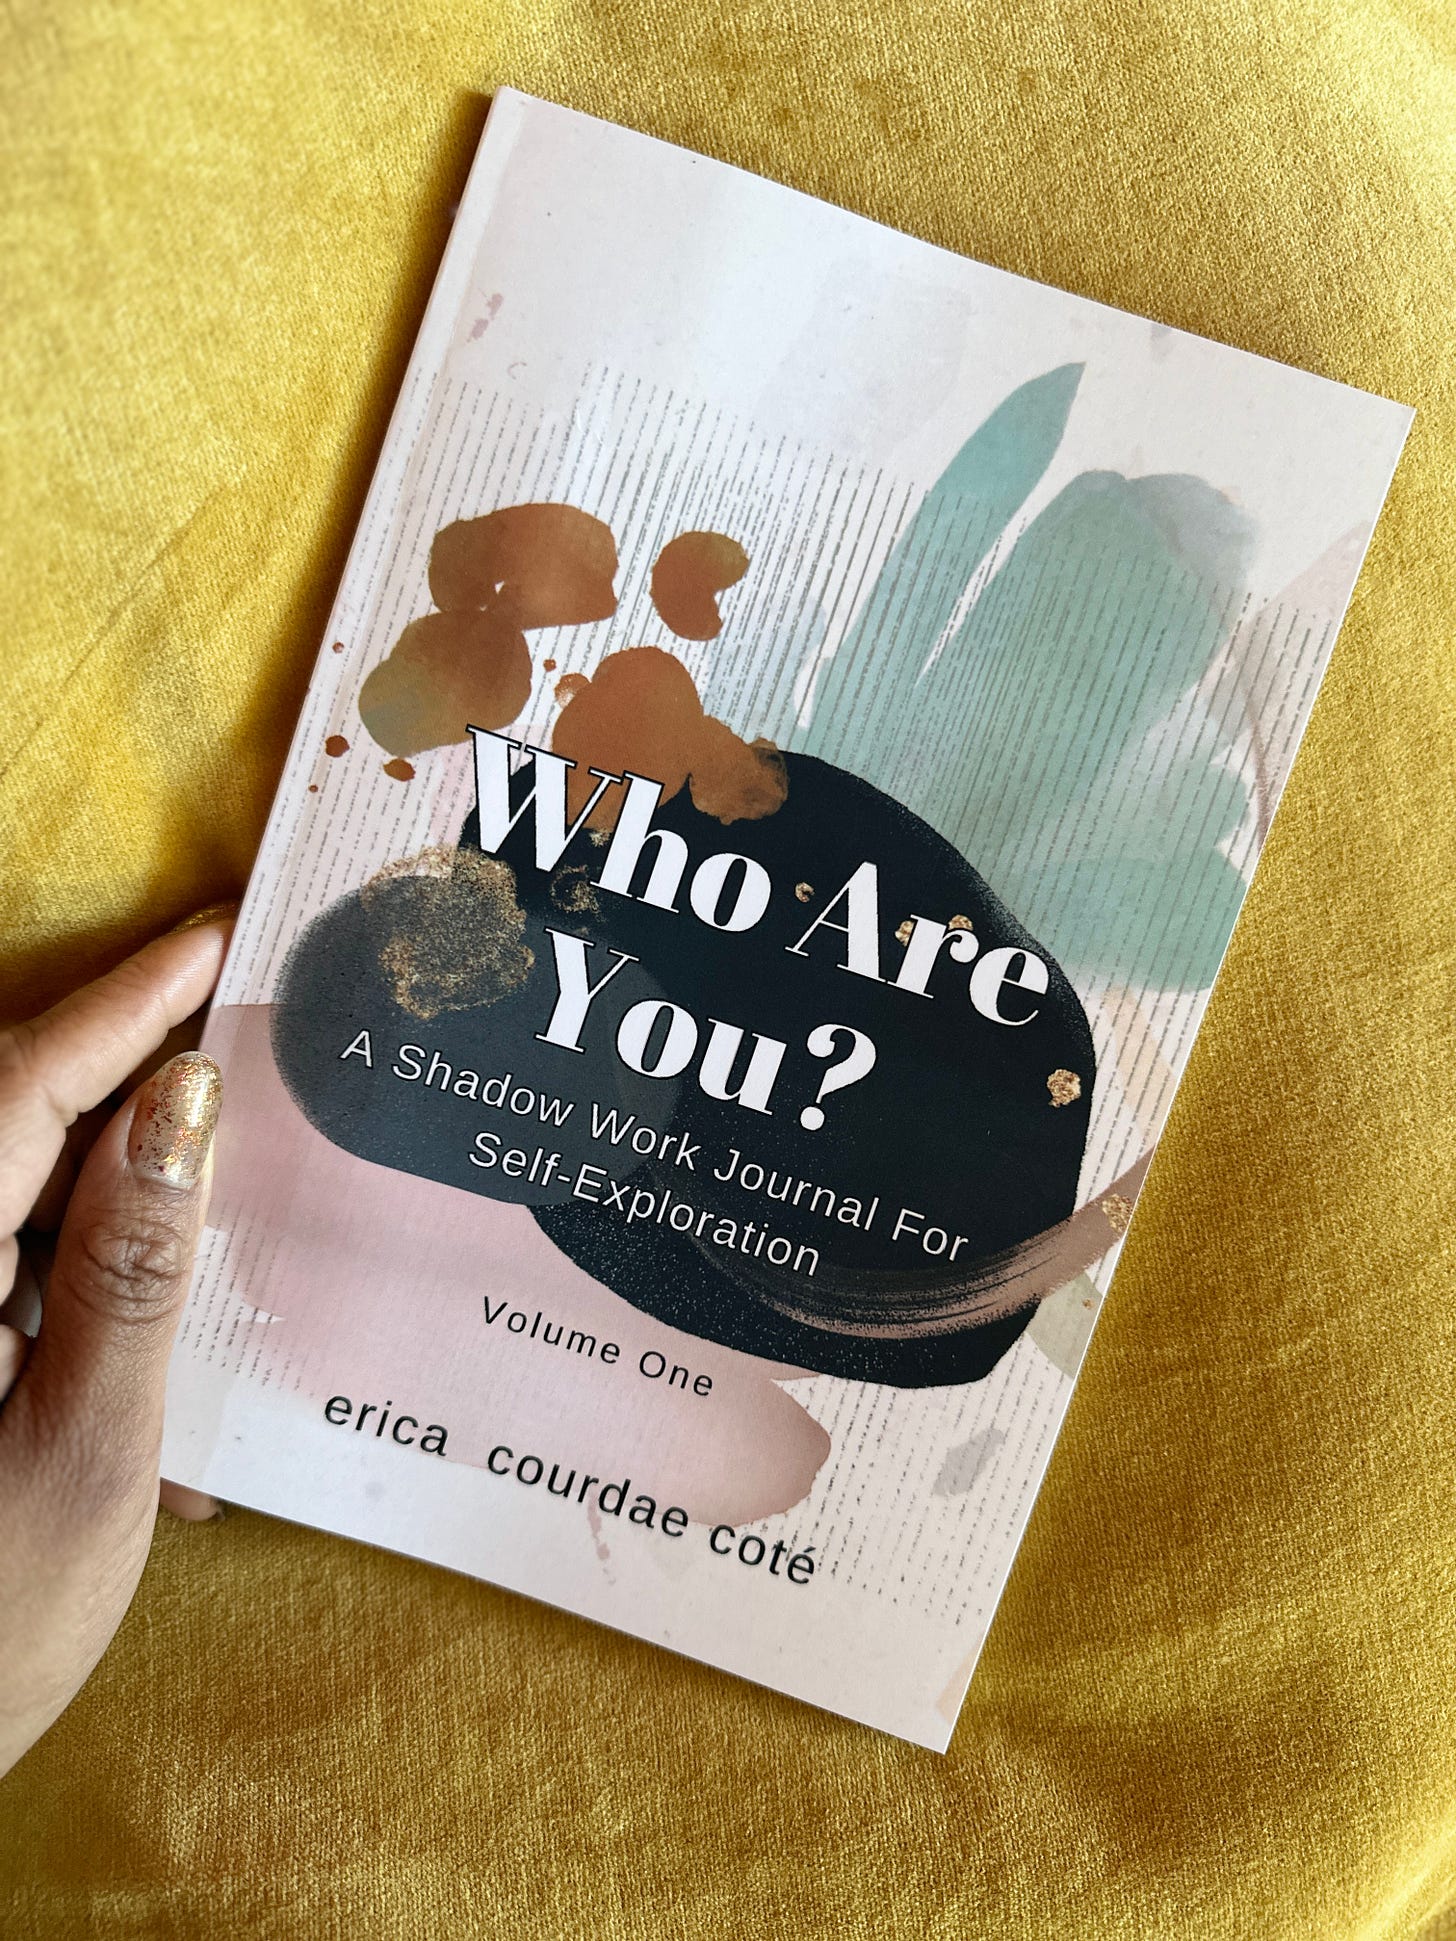 A Black woman's hand holding a copy of the book Who Are You? A Shadow Work Journal for Self-Exploration on a gold velvet pillow